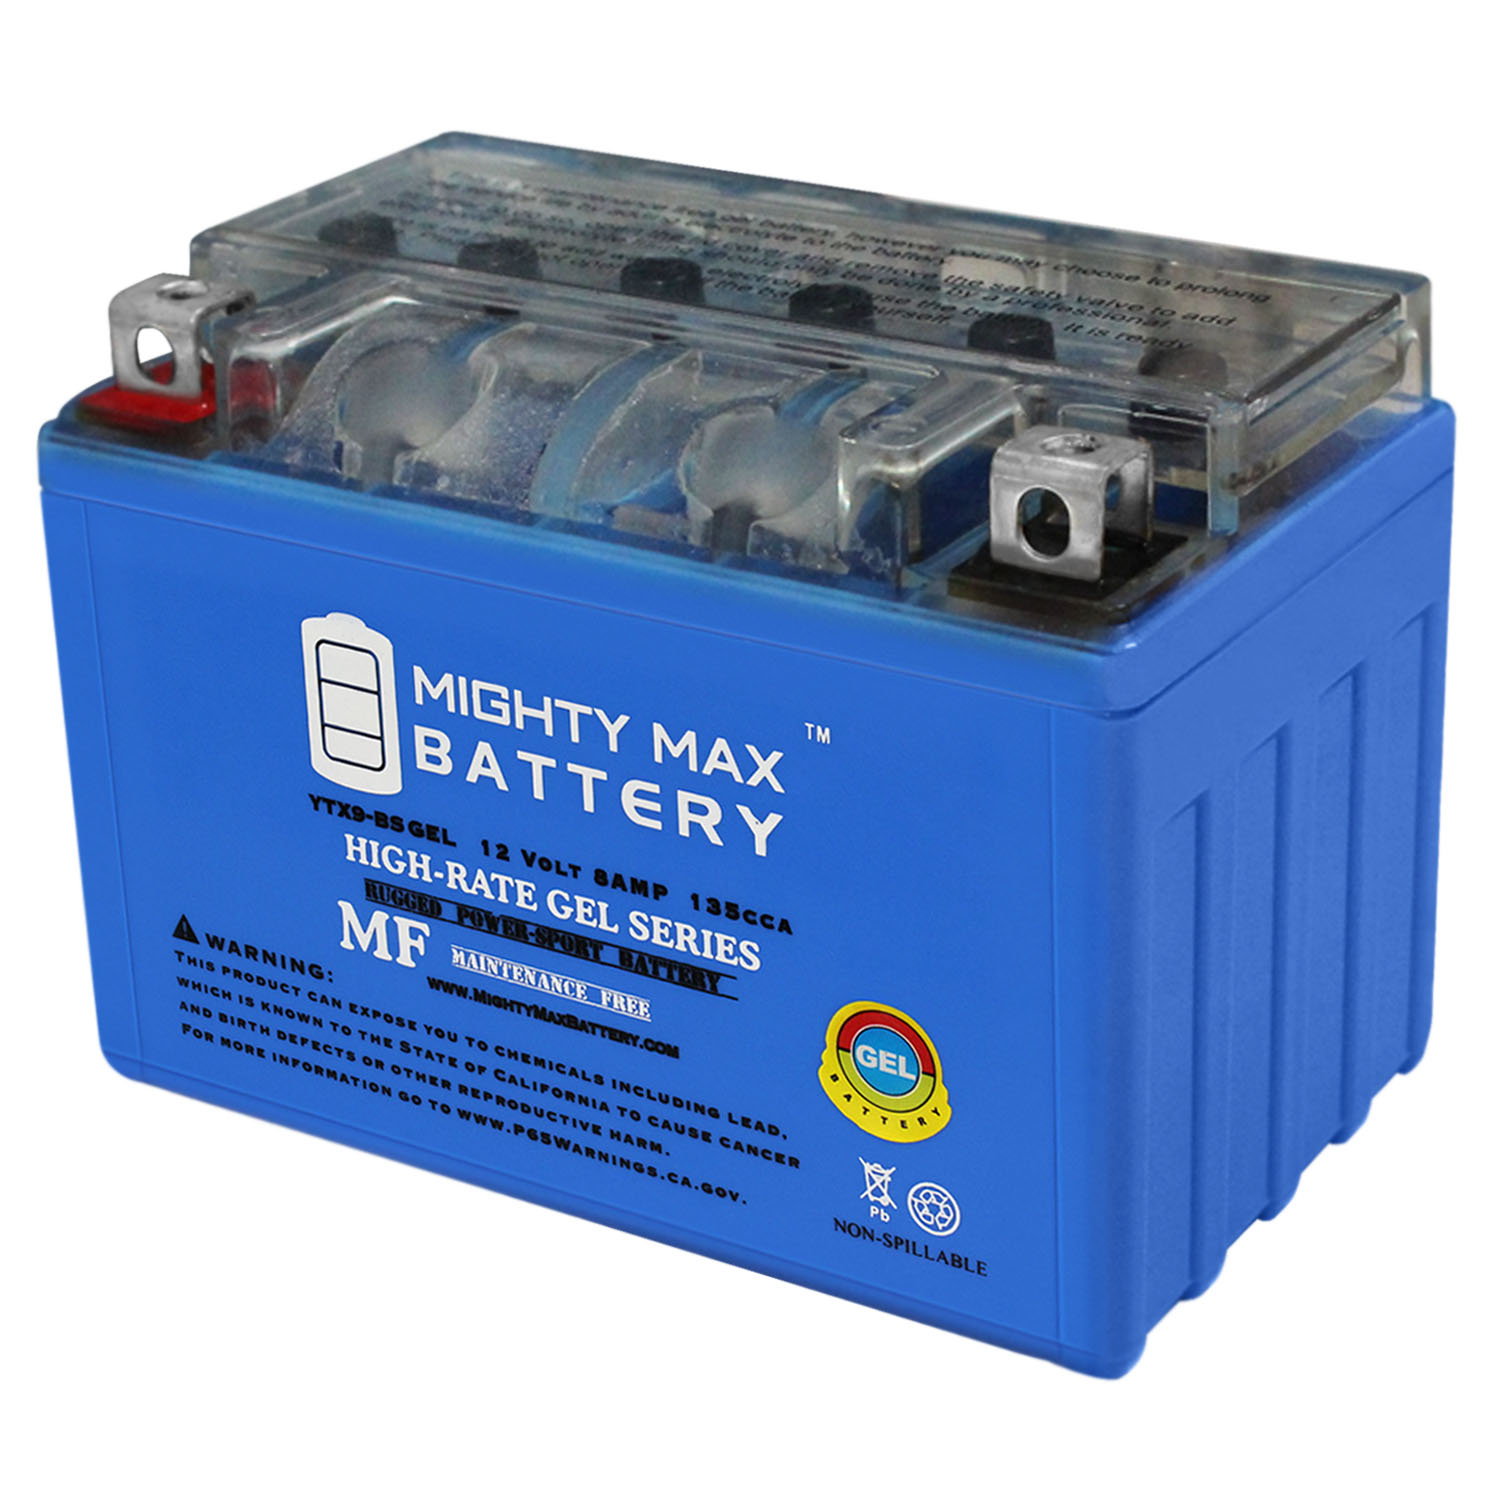 YUASA YTX9-BS. Rechargeable 12V 8,4 Ah motorcycle battery with